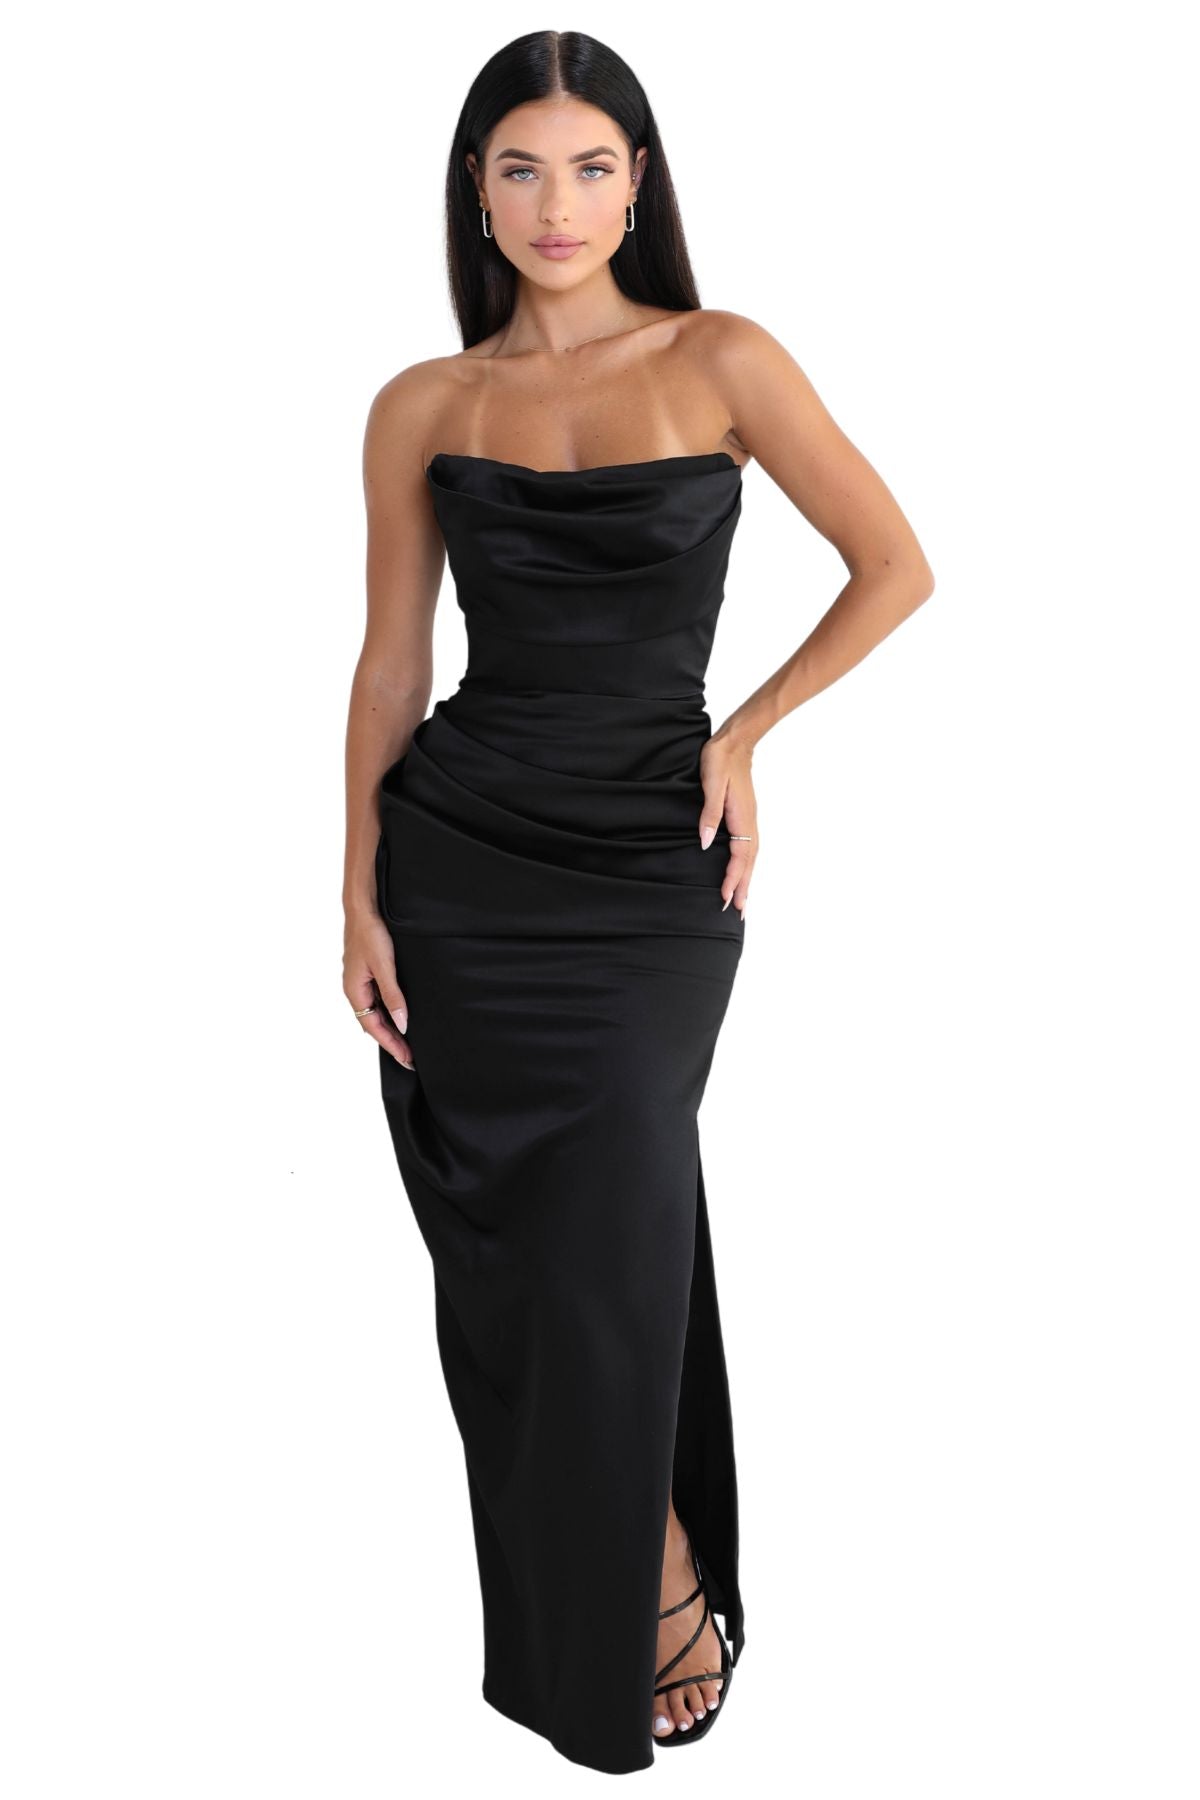 Natalie Rolt Celine Gown available for hire – The Social Wardrobe